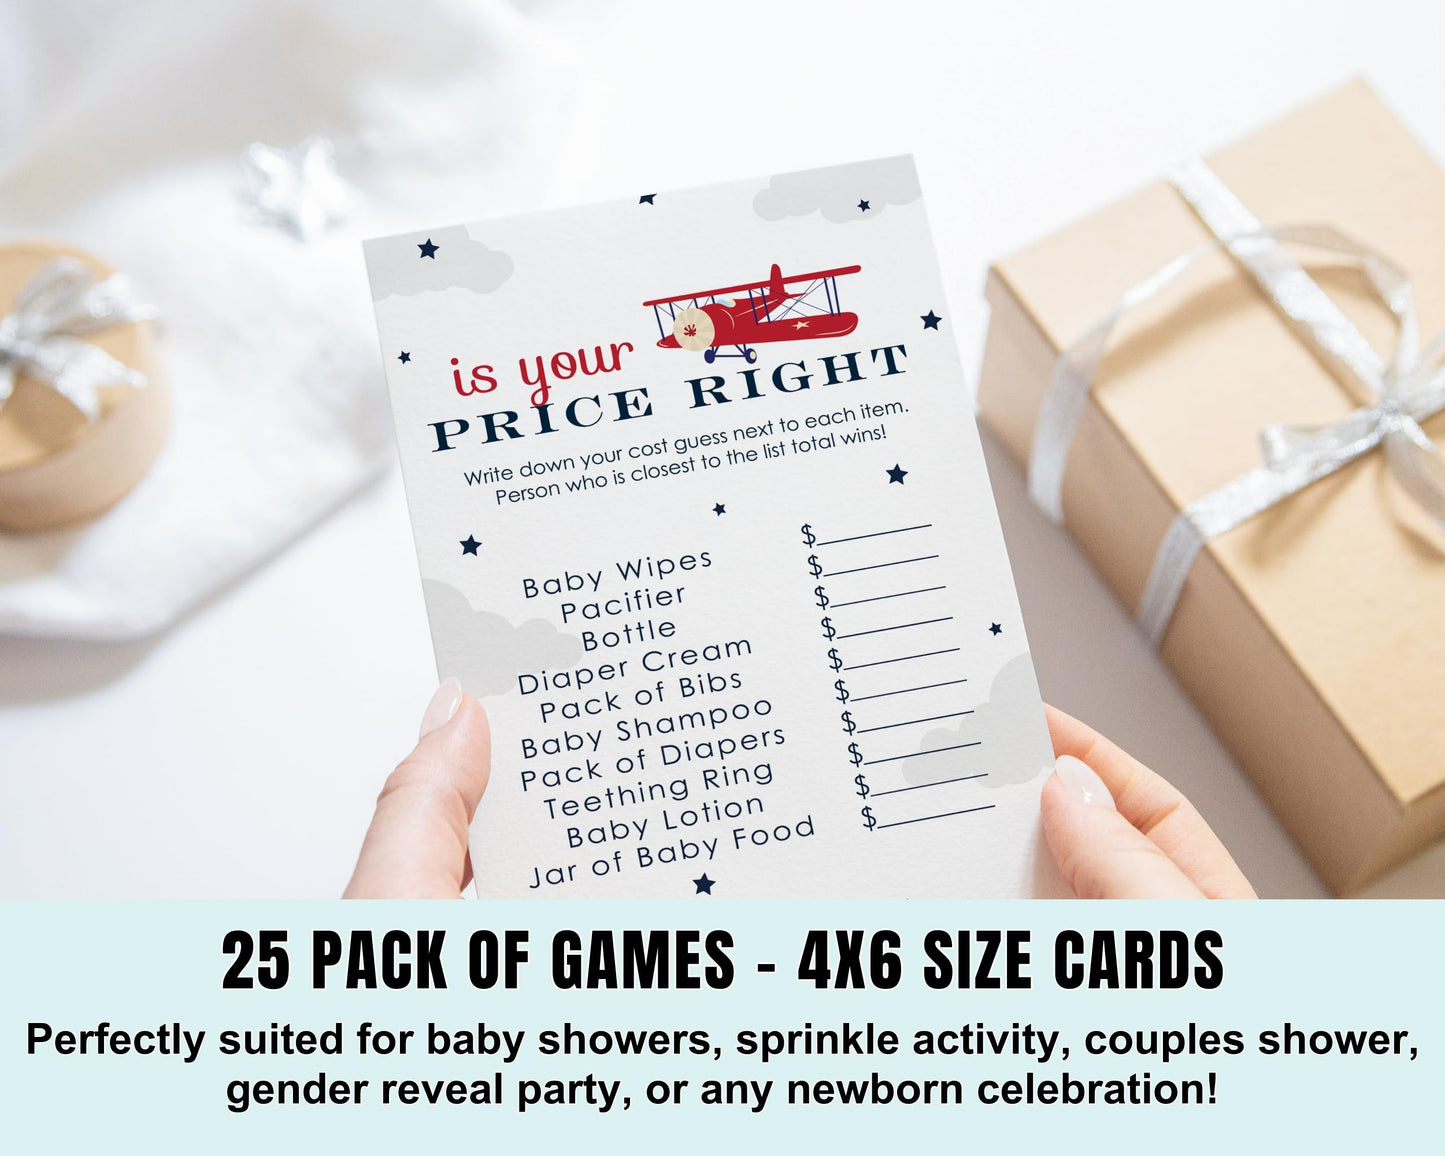 Price Game - 25 Pack, Fun Guessing Activity Cards, Easy PlayPaper Clever Party